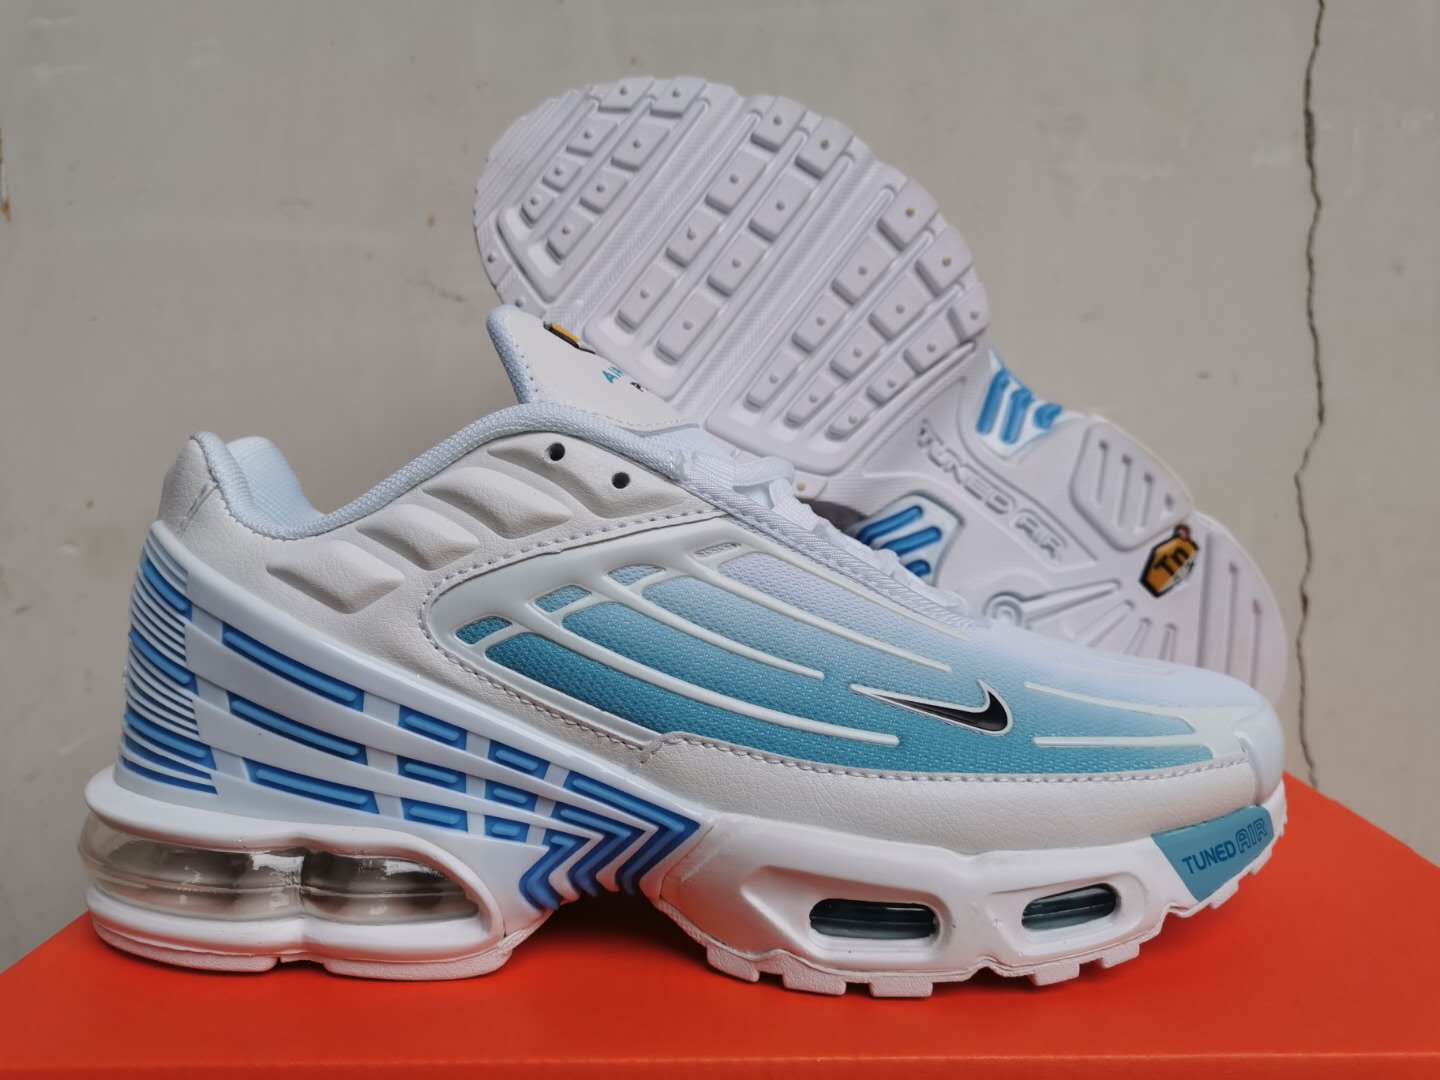 Men's Hot sale Running weapon Air Max TN Shoes 069